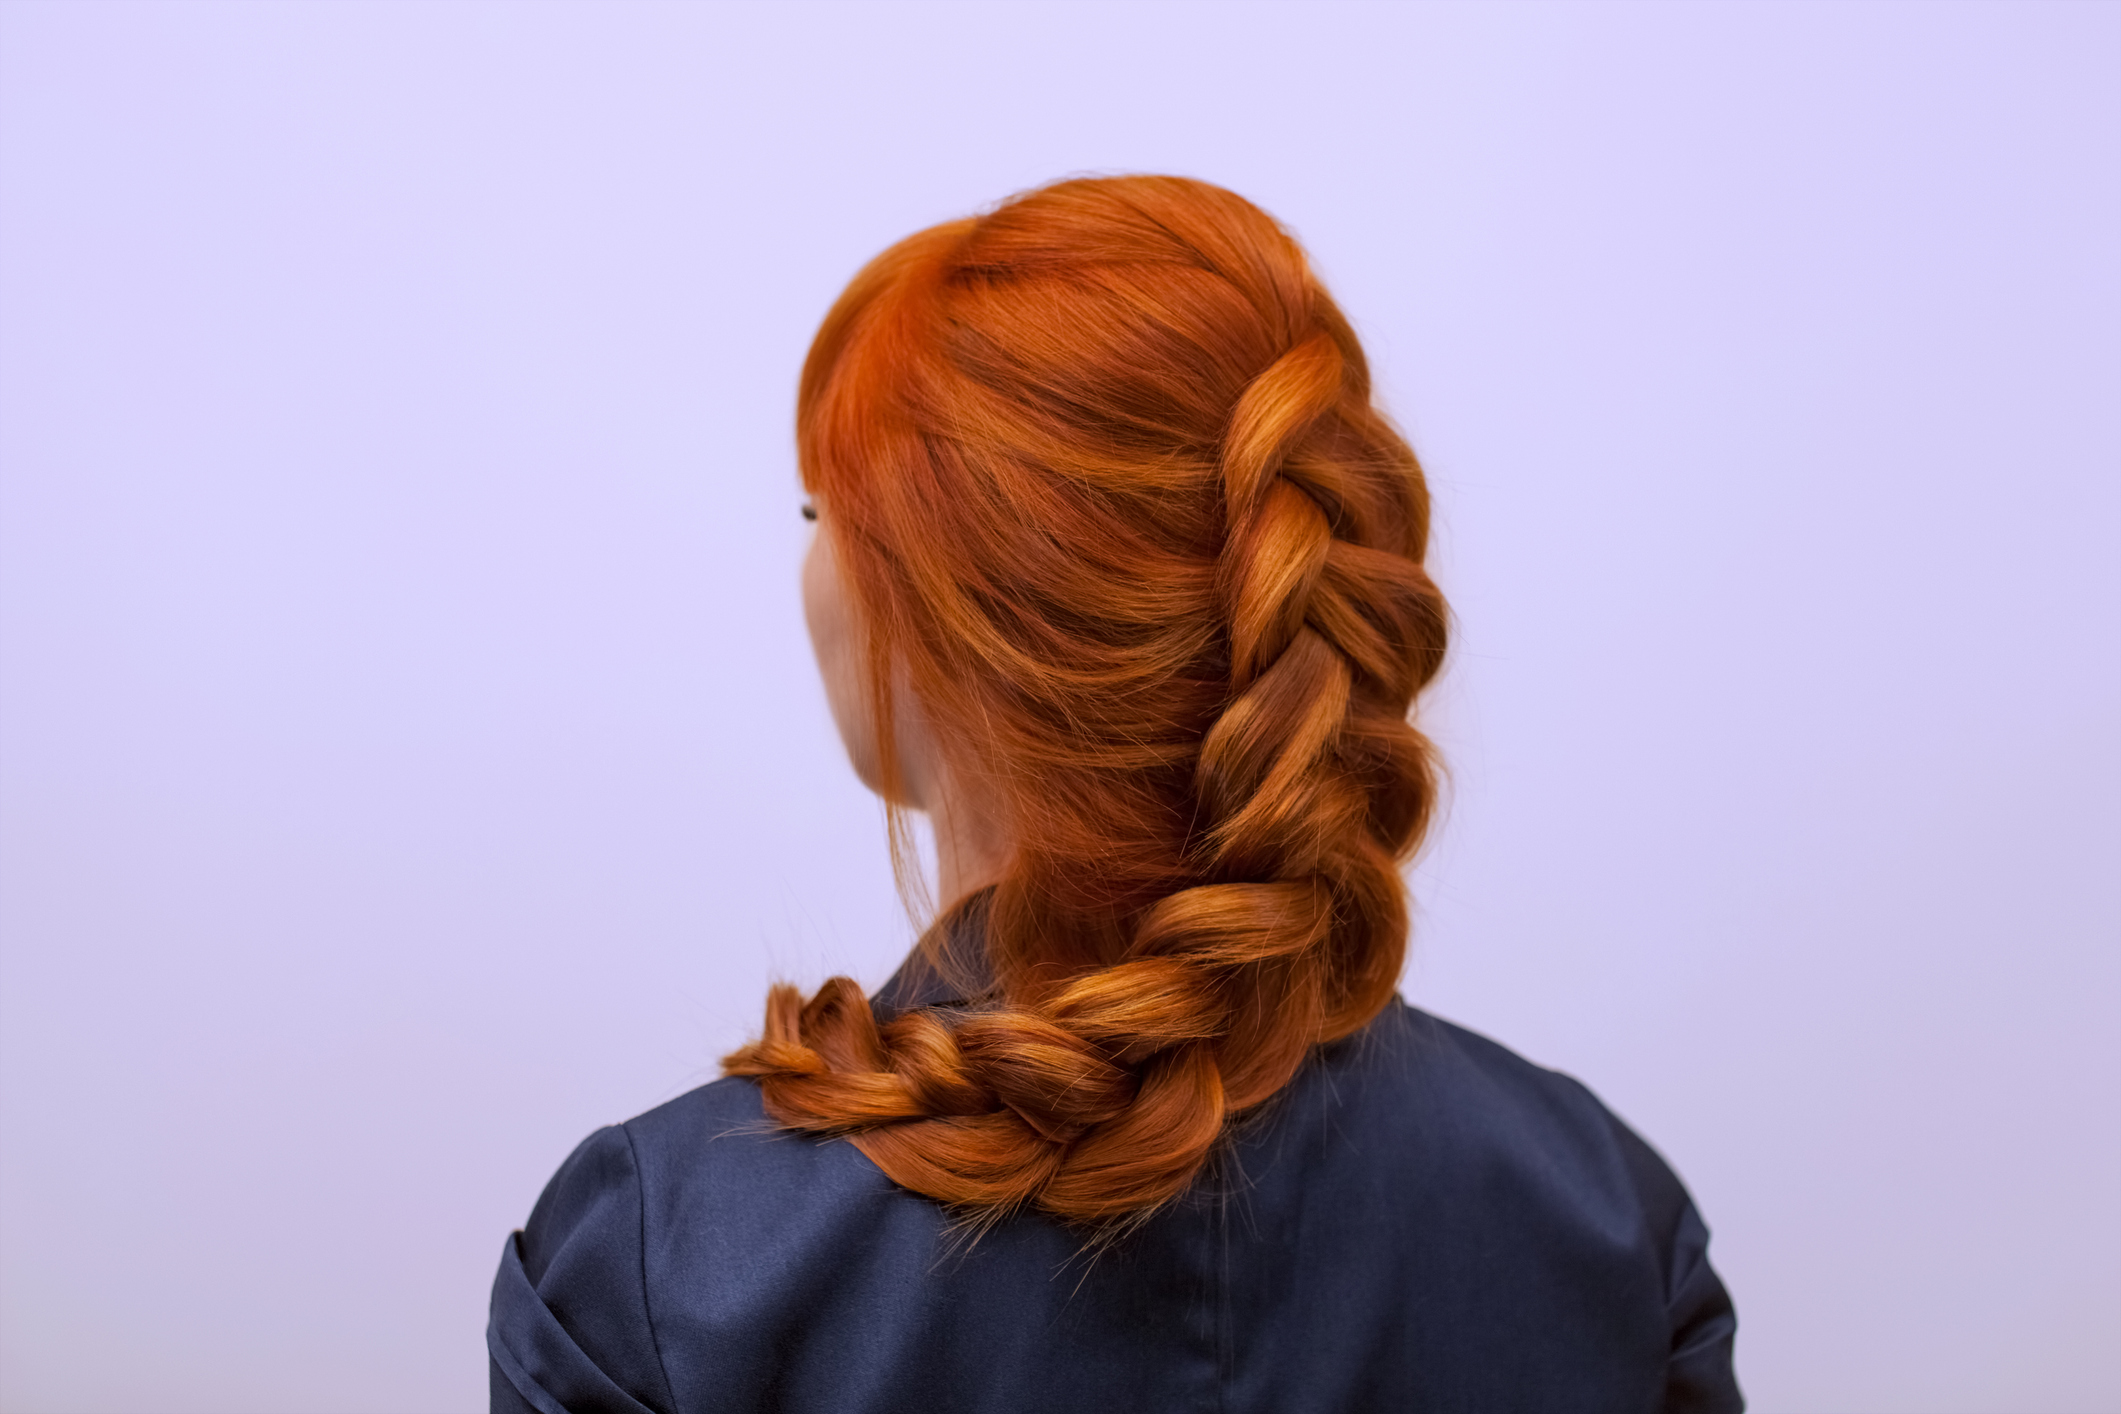 Woman with red hair in a braid with her back turned